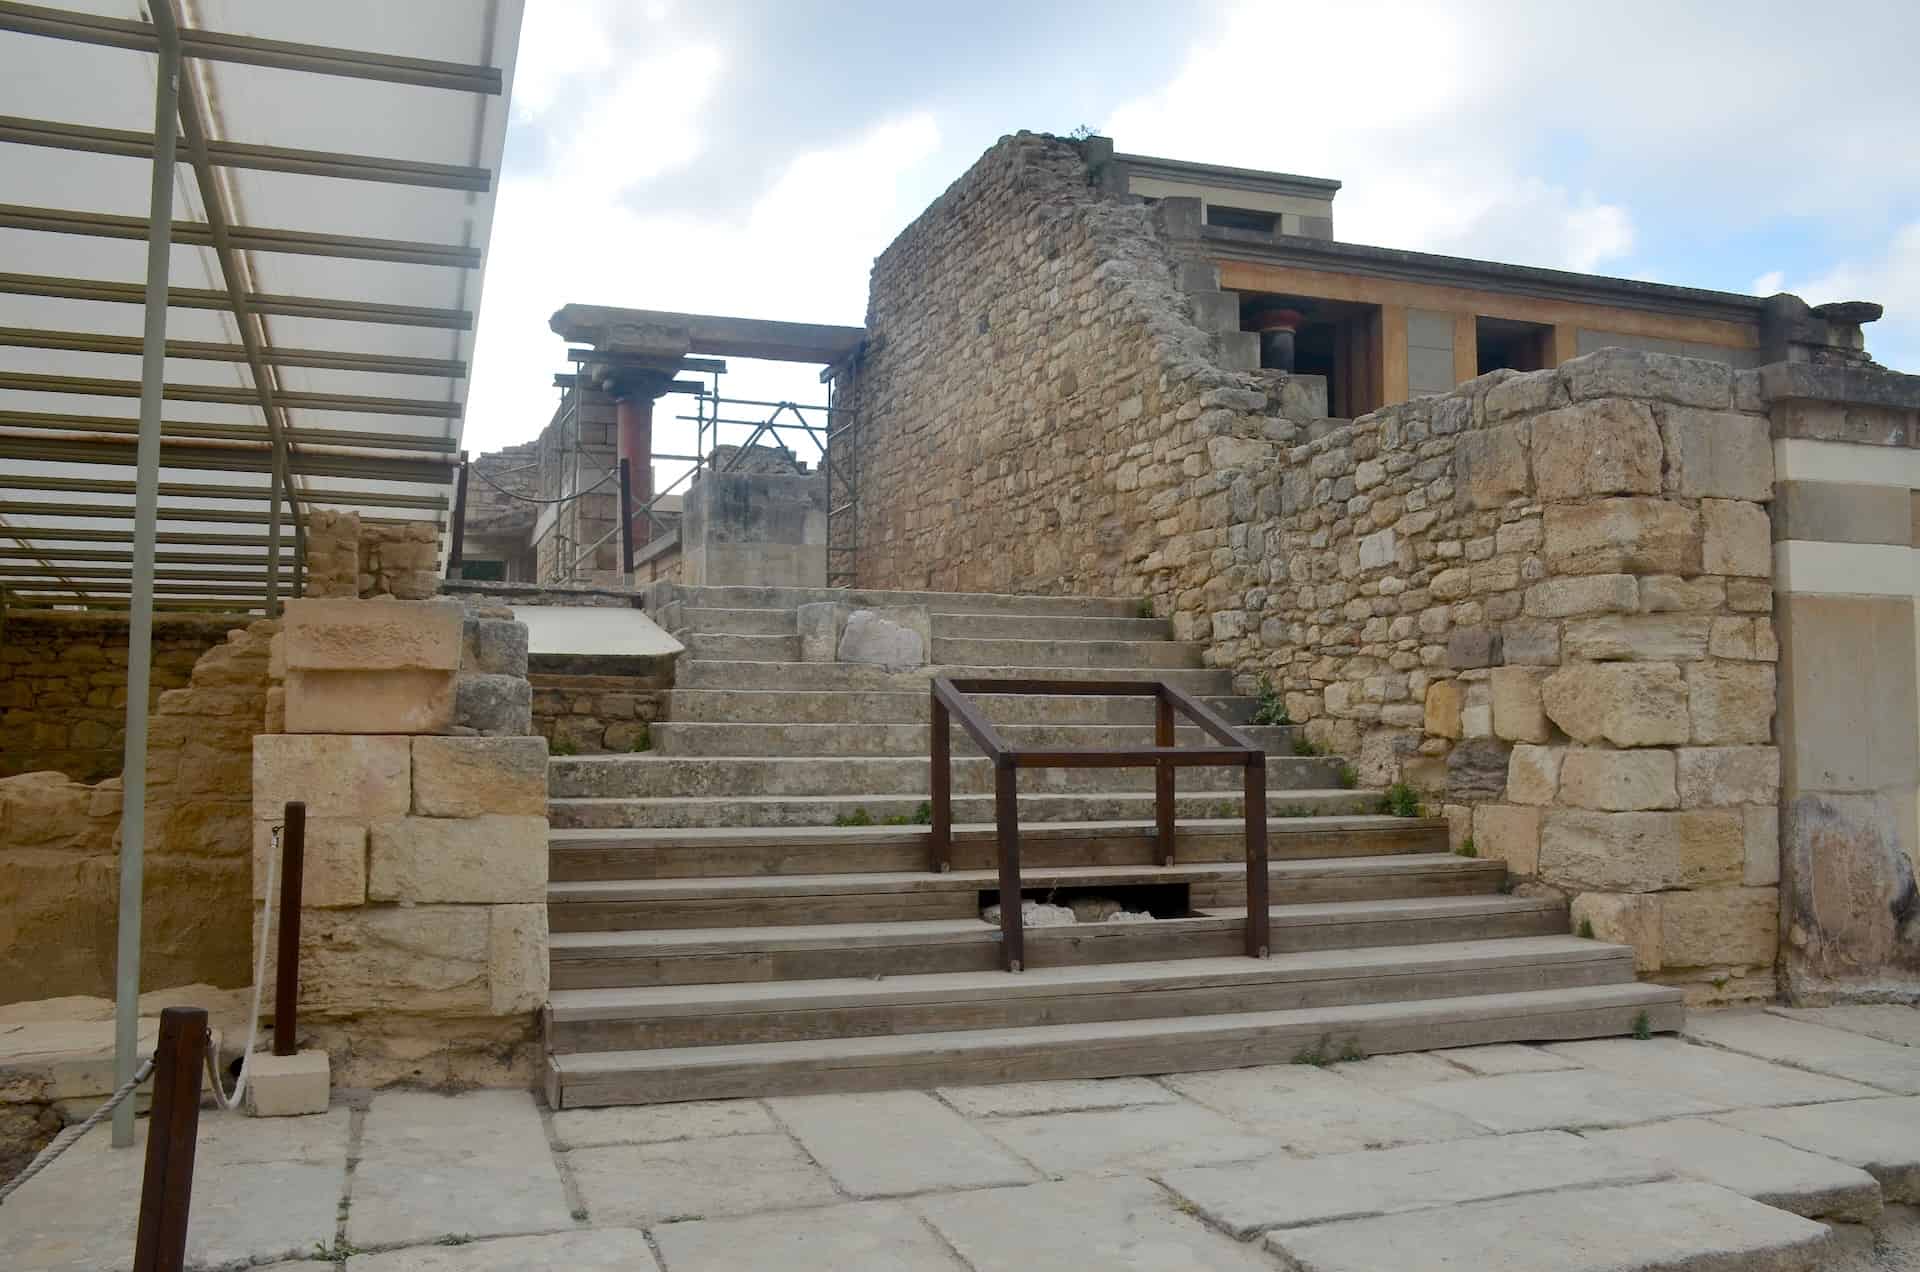 Stairs between the Central Court and Piano Nobile at Knossos, Crete, Greece